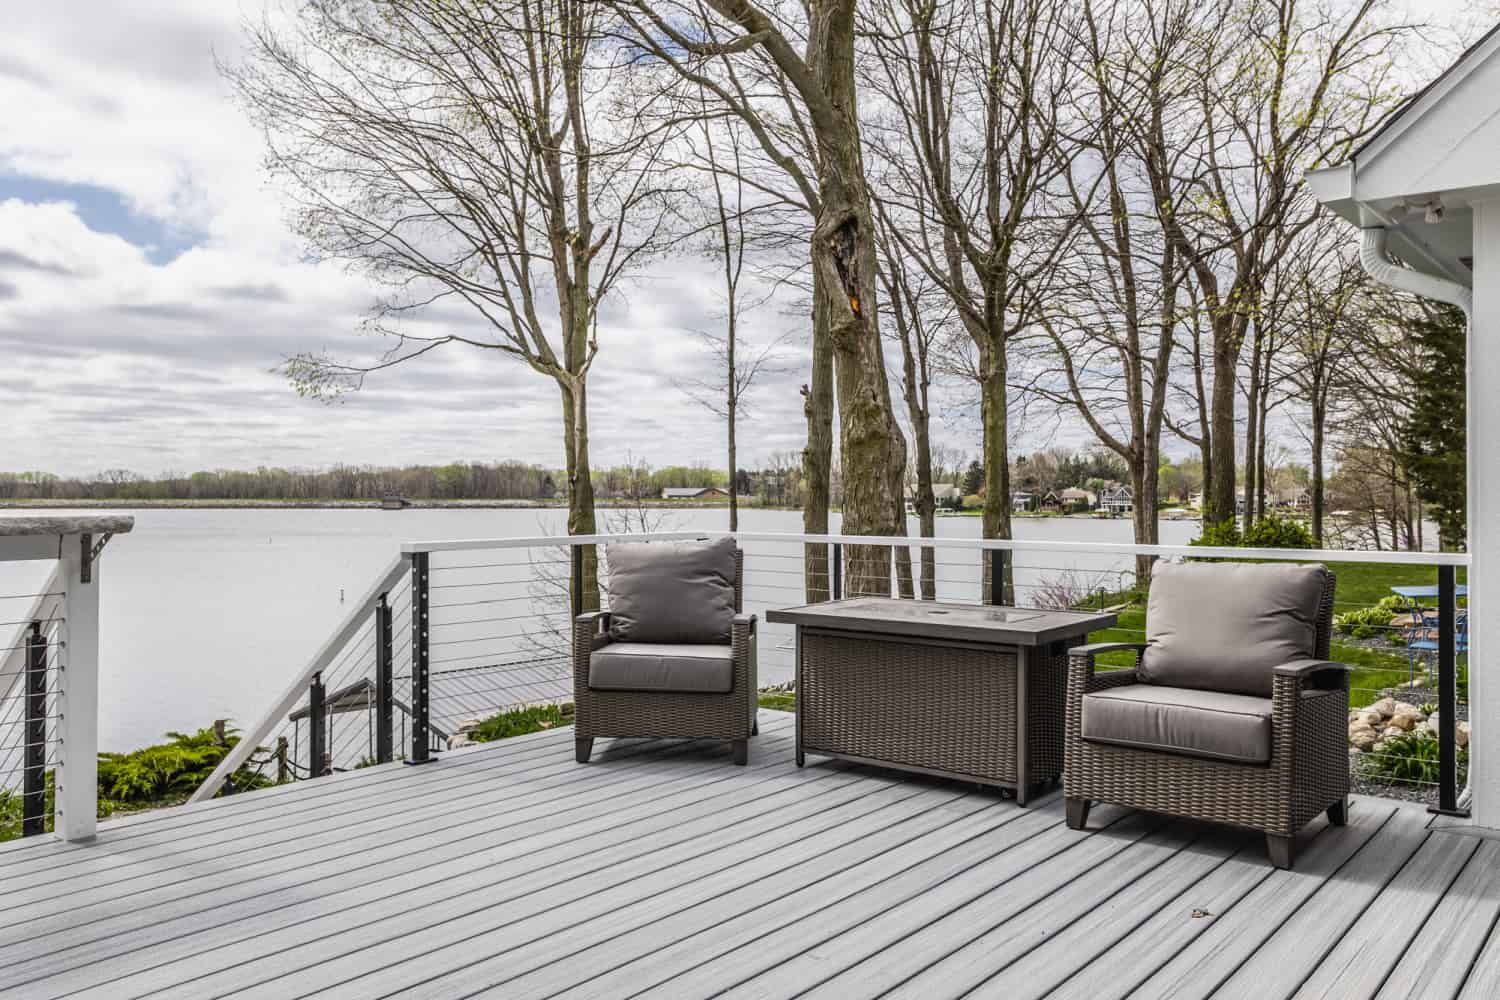 Nicholas Design Build | A deck with wicker furniture and a view of a lake, perfect for a remodel.